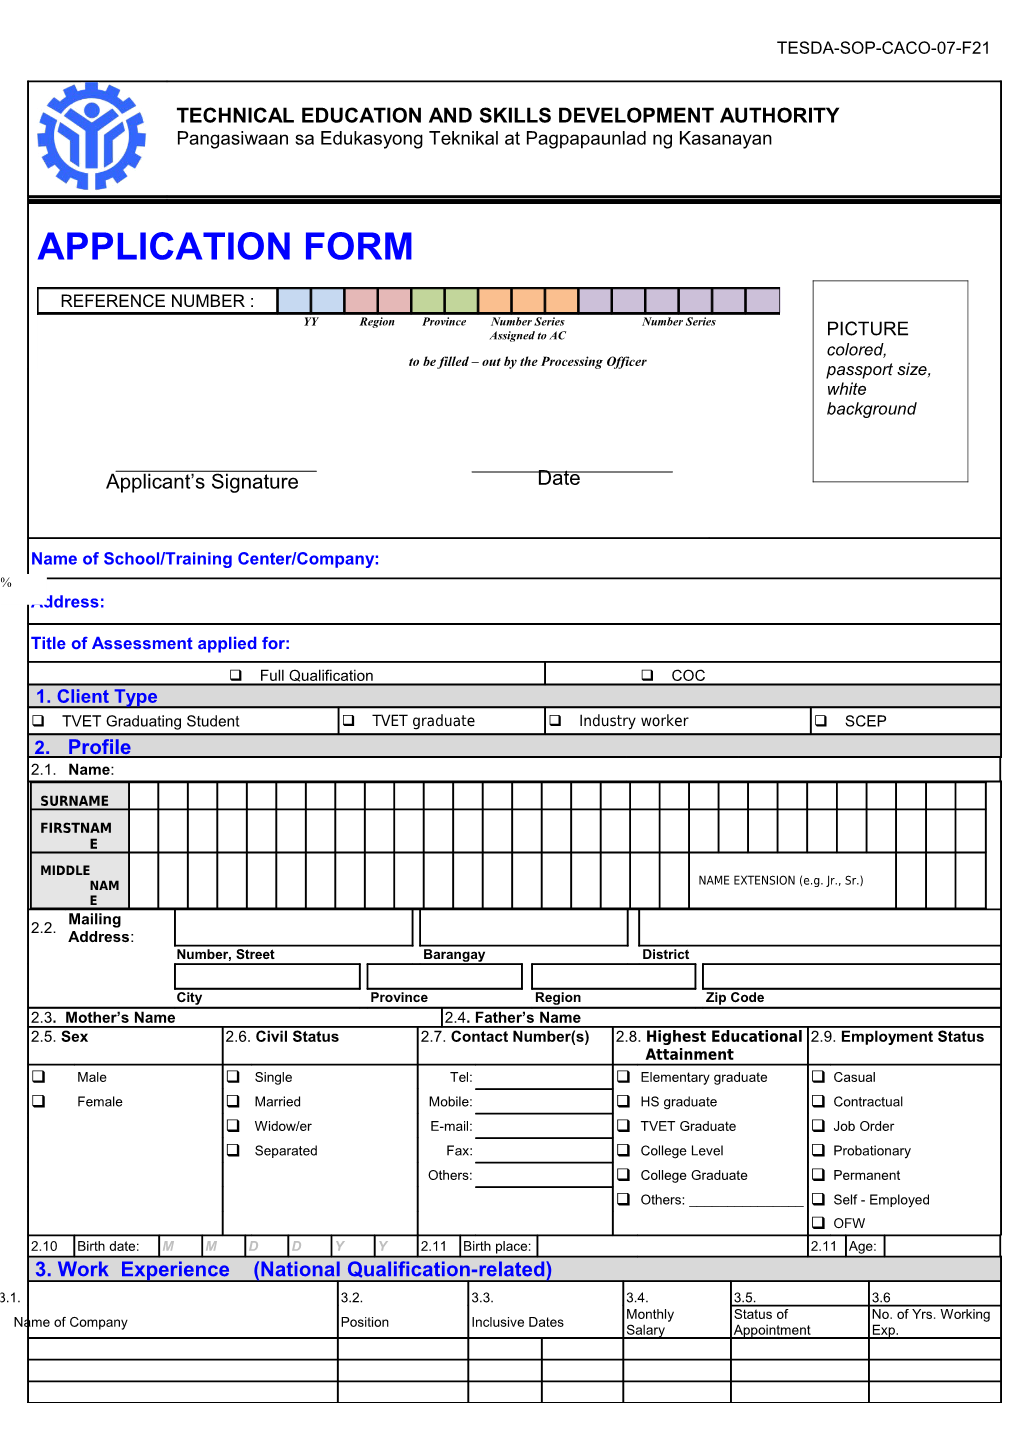 Application Form s2